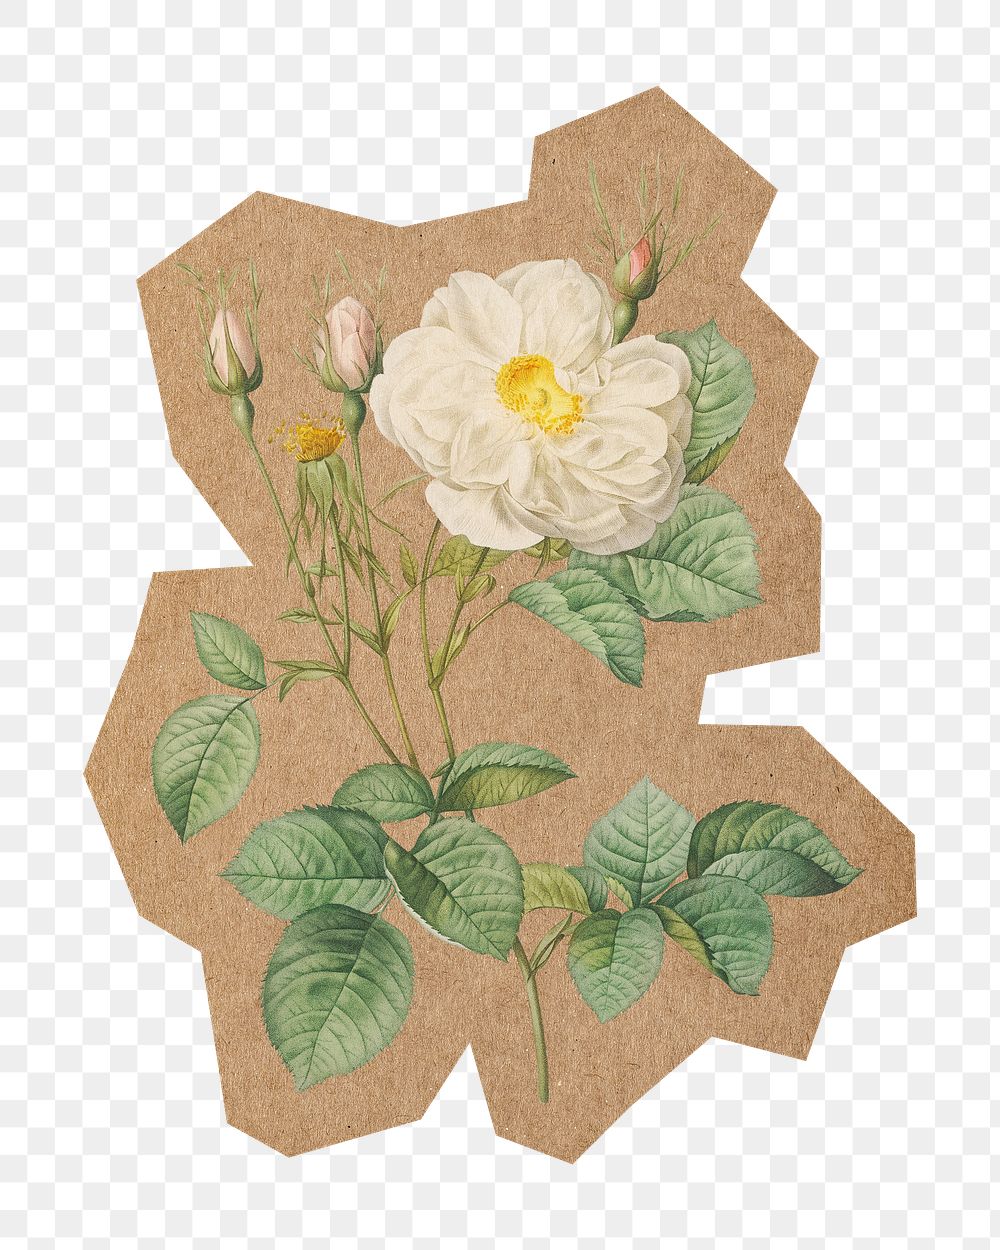 Vintage white rose png, cut out paper element, transparent background. Artwork from Pierre Joseph Redouté remixed by…